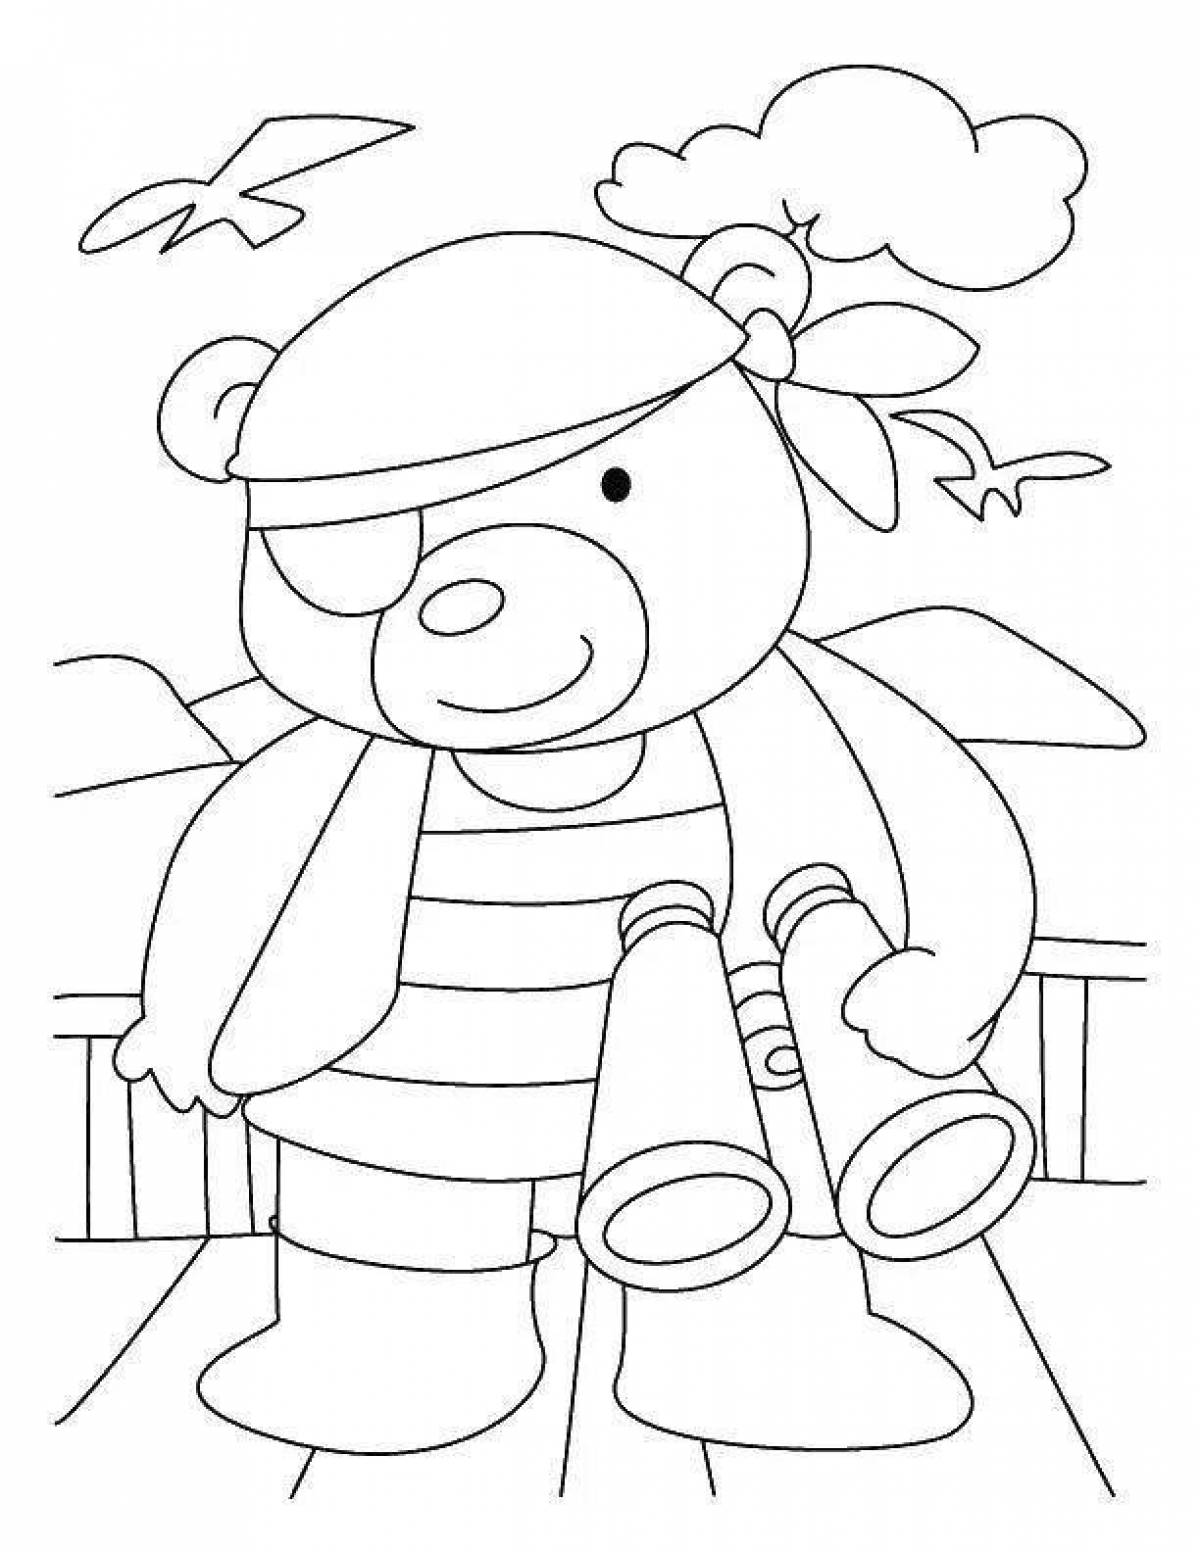 Coloring page happy gummy bears